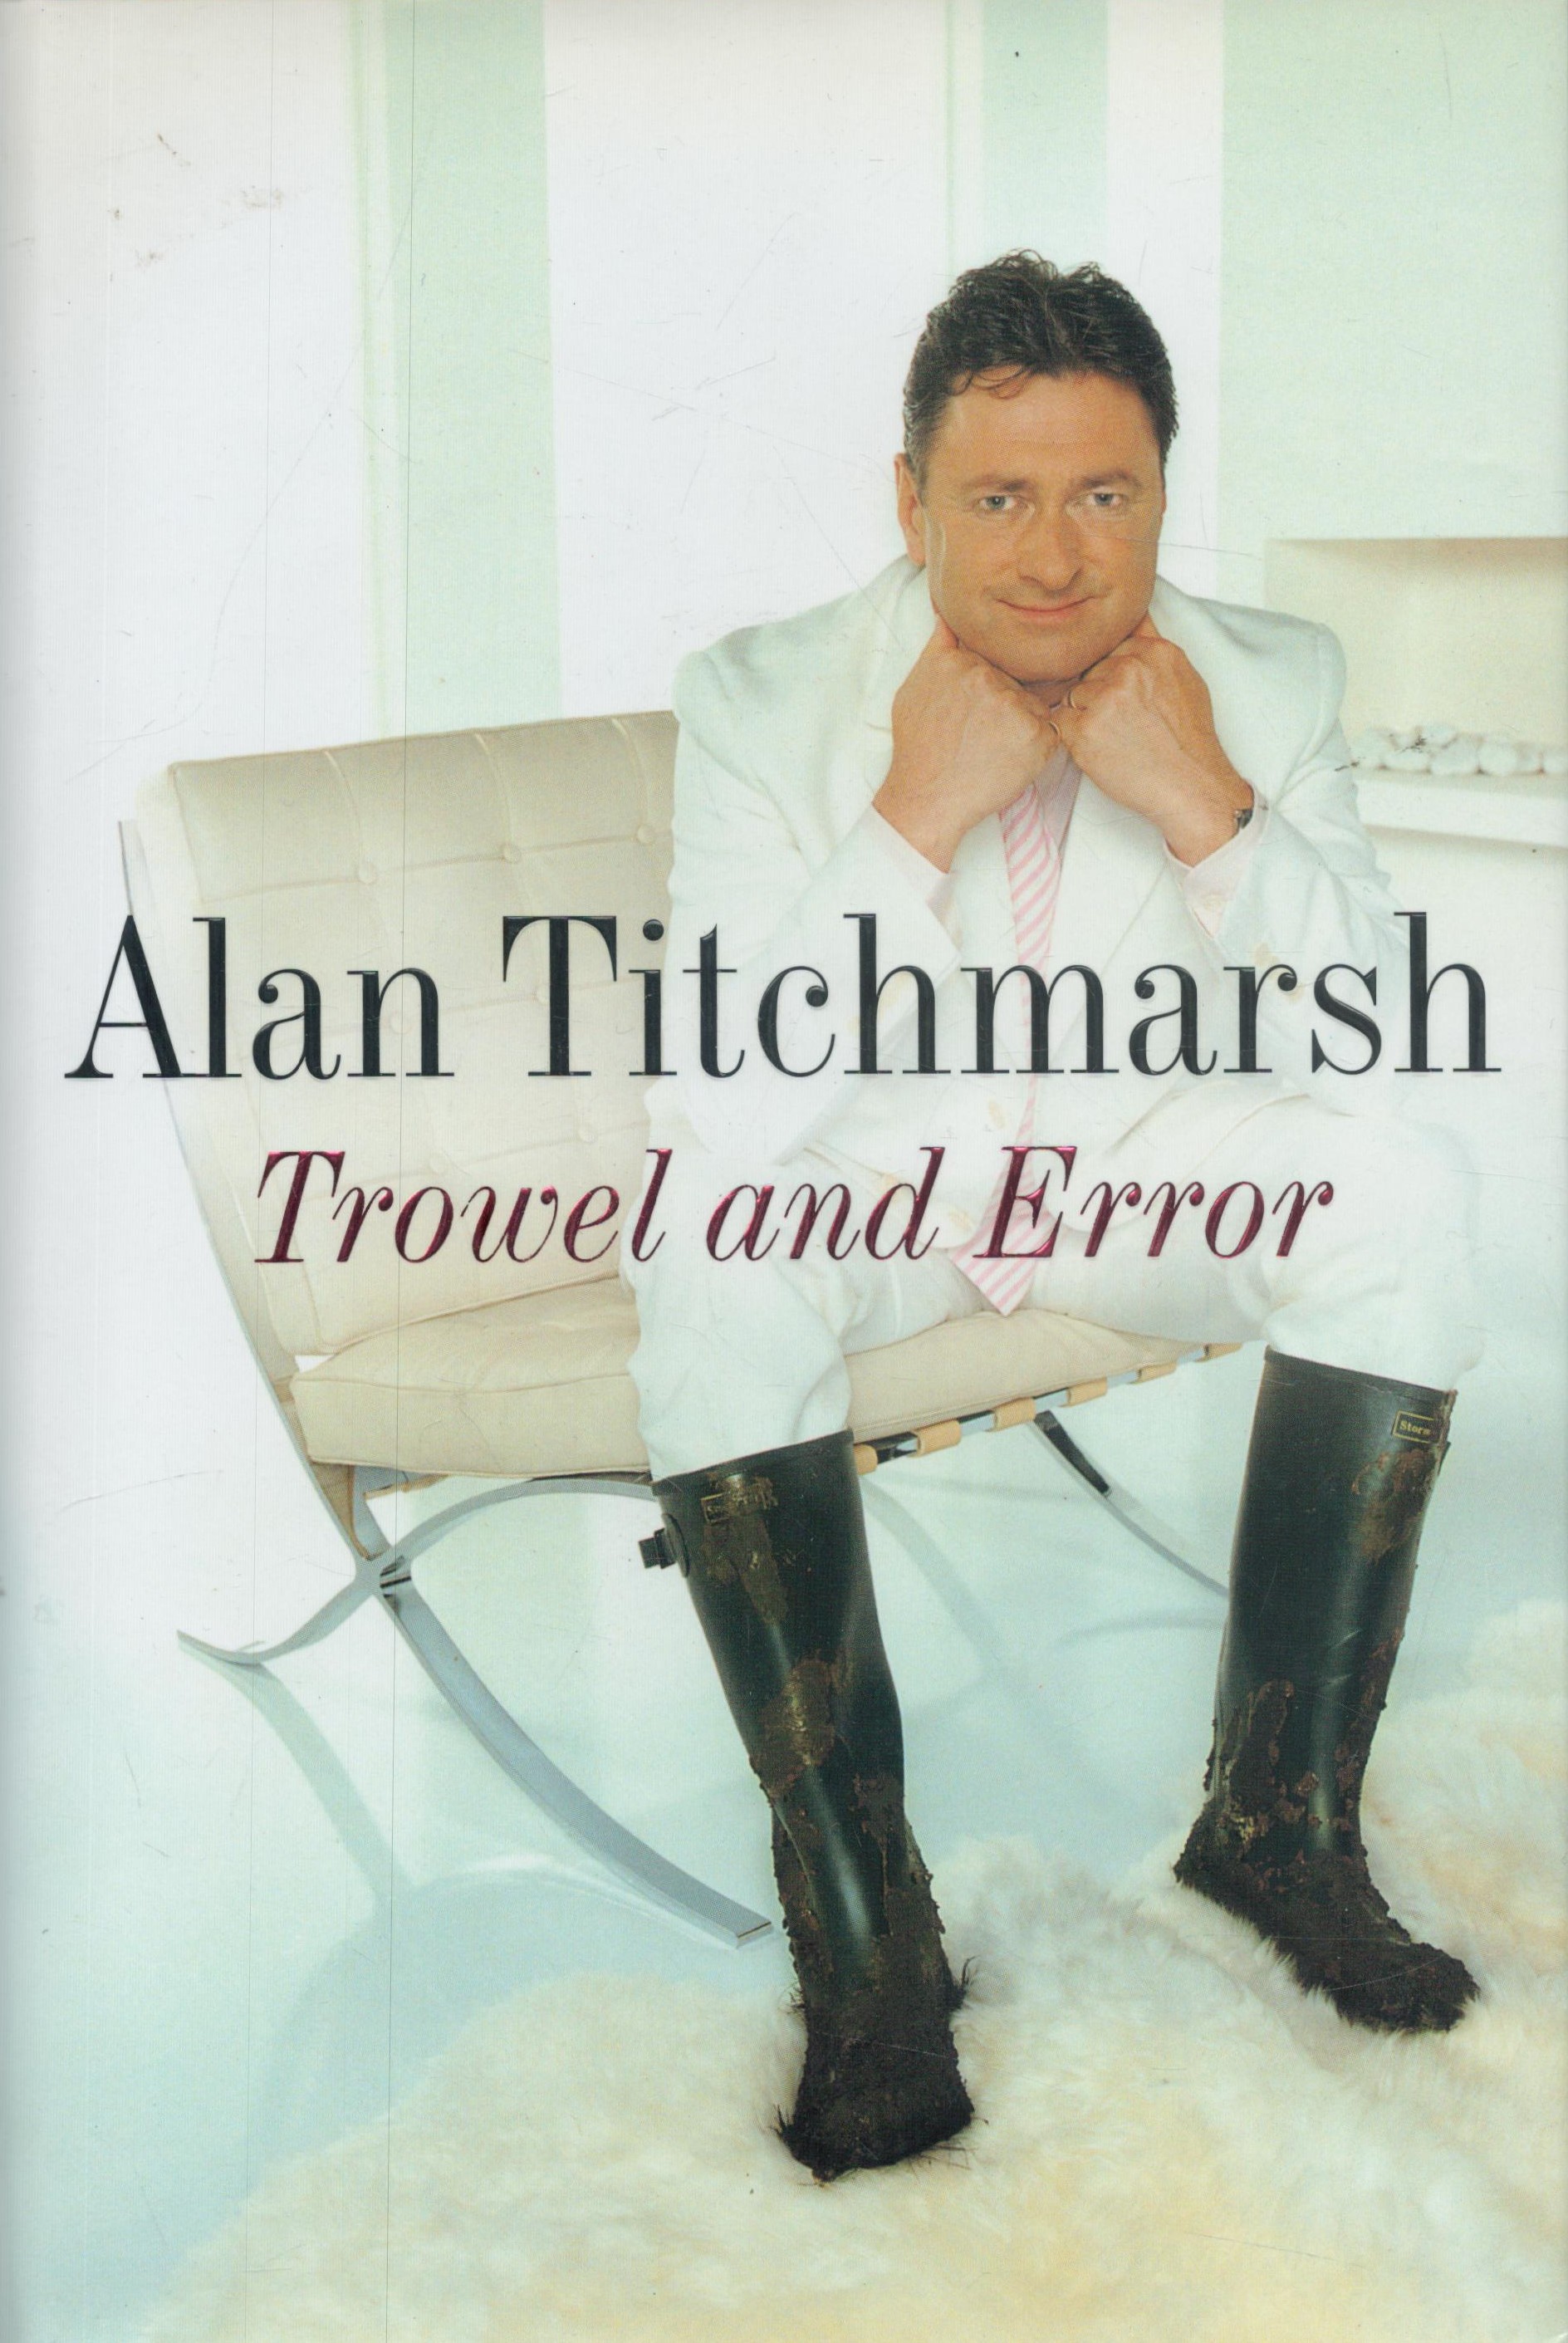 Trowel and Error signed by Alan Titchmarsh, First Edition hardback book. DEDICATED. Good